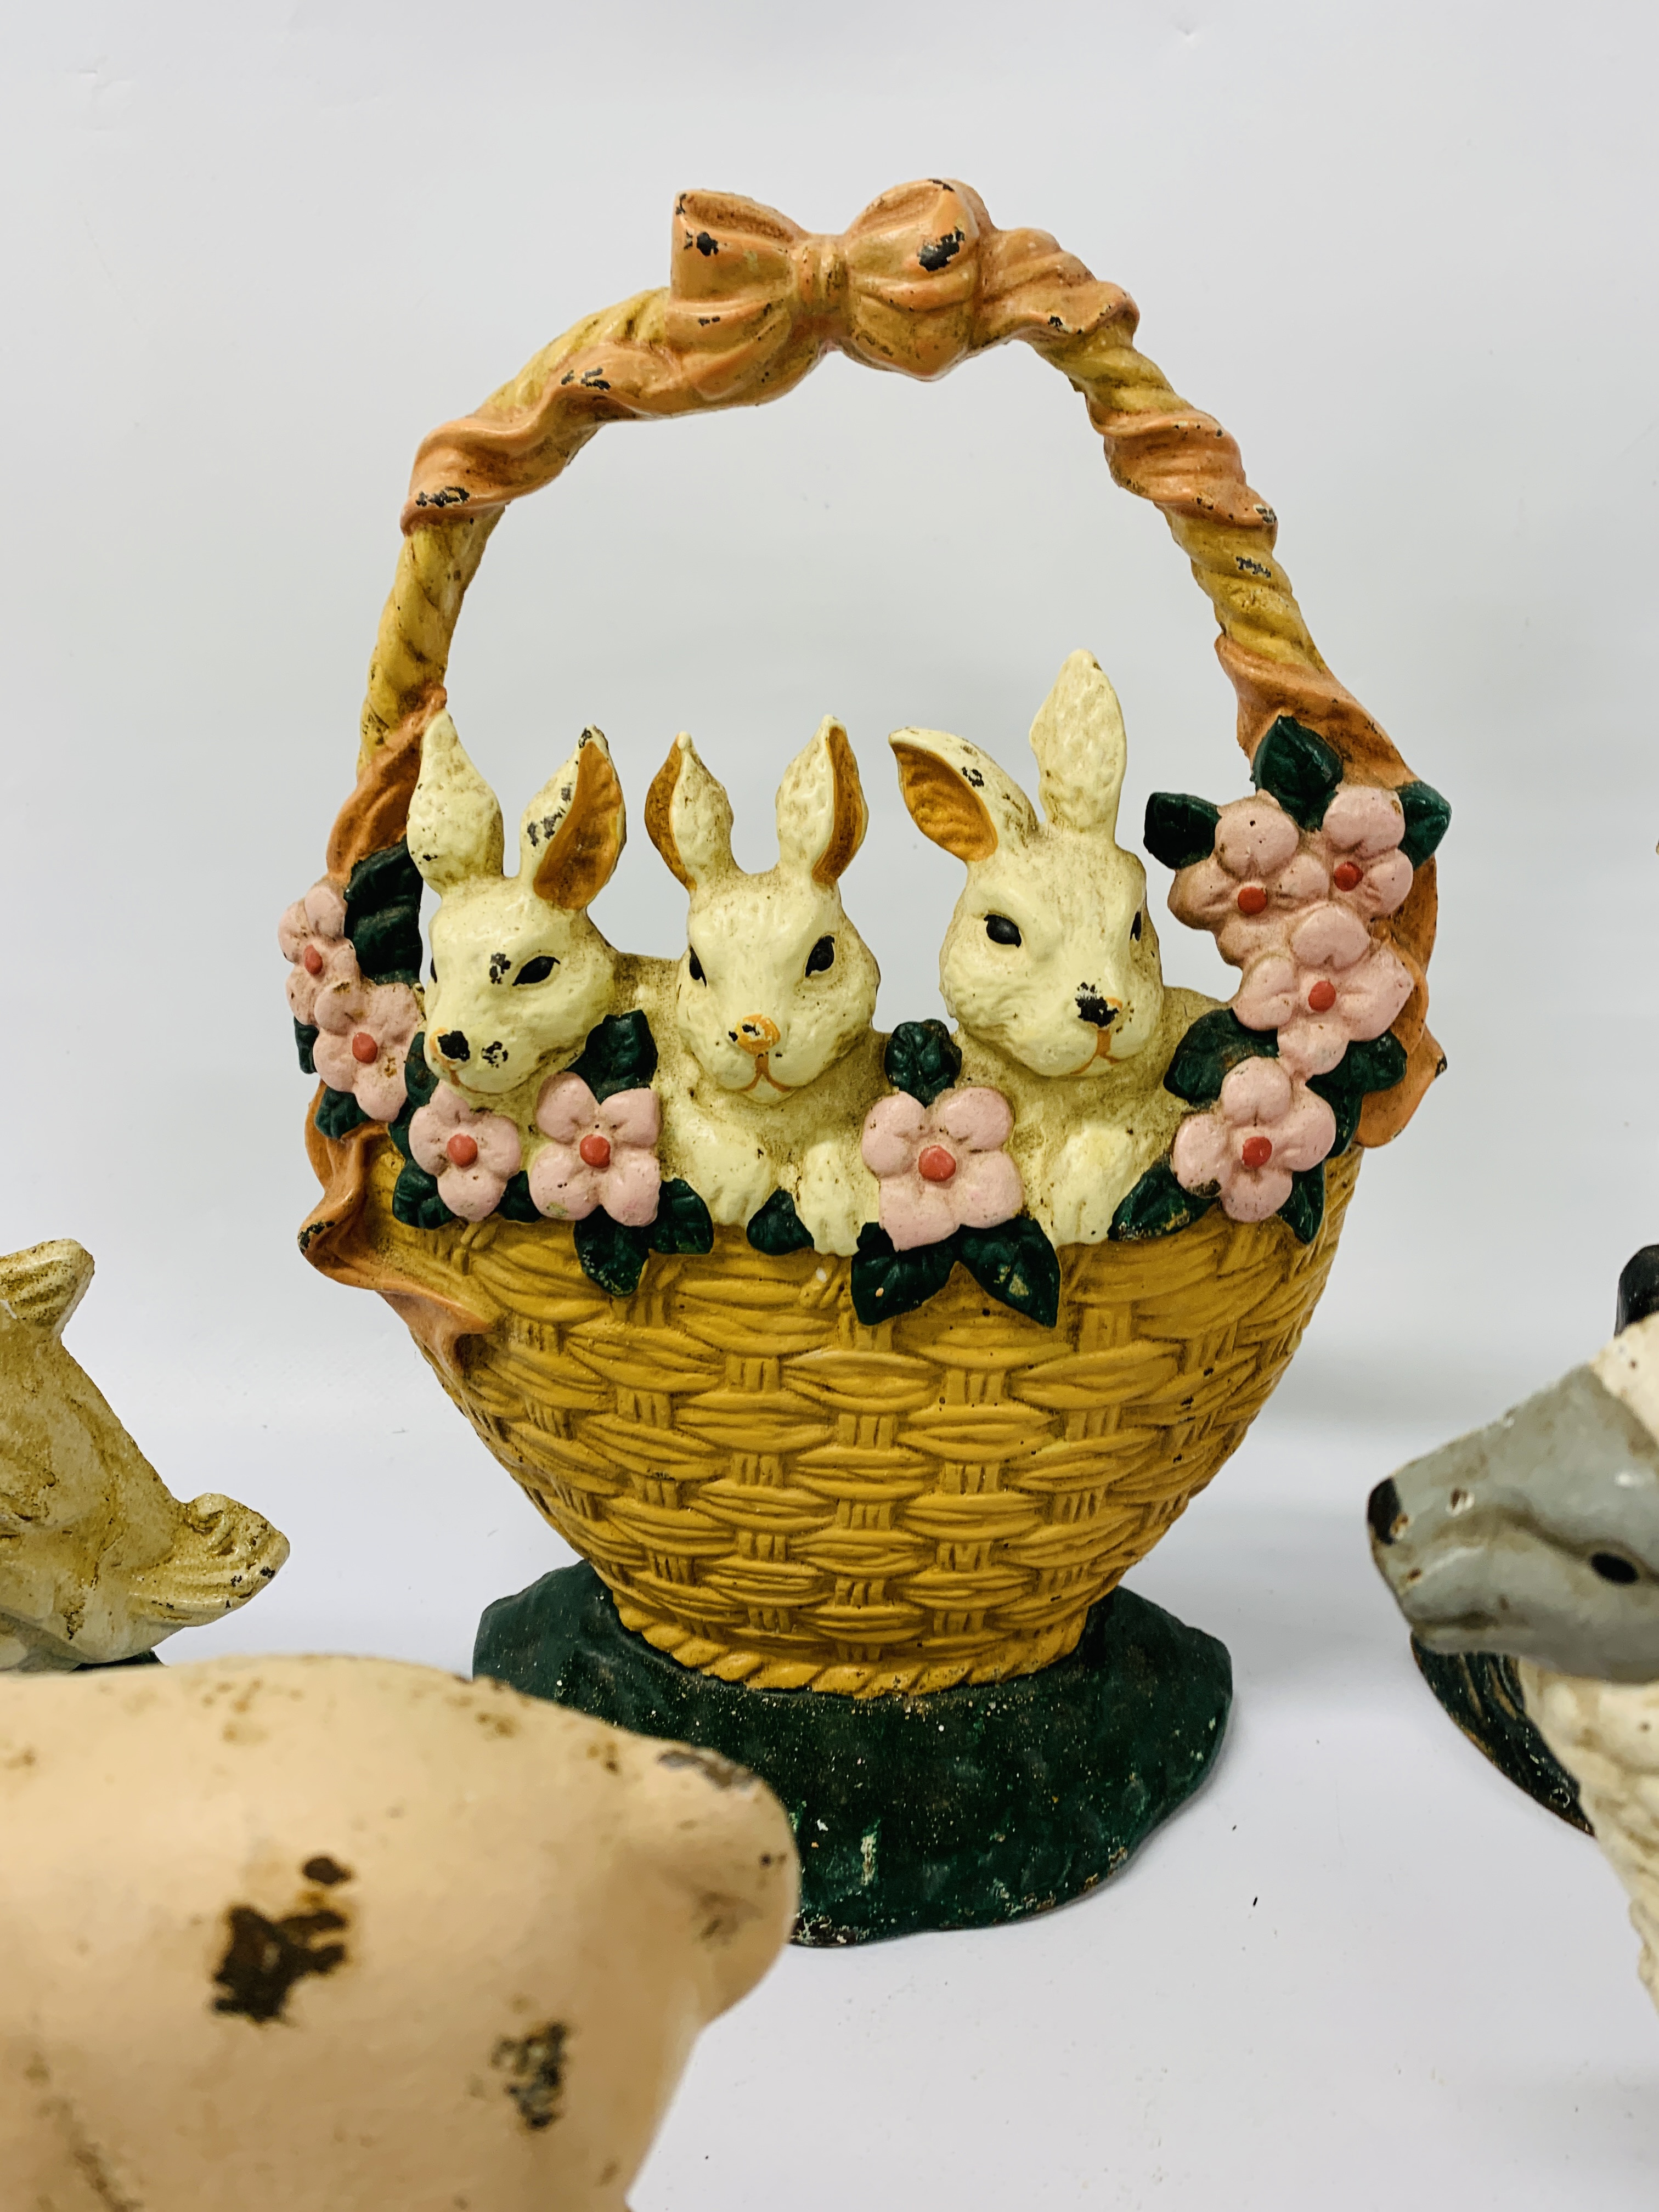 COLLECTION OF CAST REPRODUCTION DOORSTOPS TO INCLUDE EASTER BUNNIES, DUCKS, PIGS, ETC. - Image 7 of 8